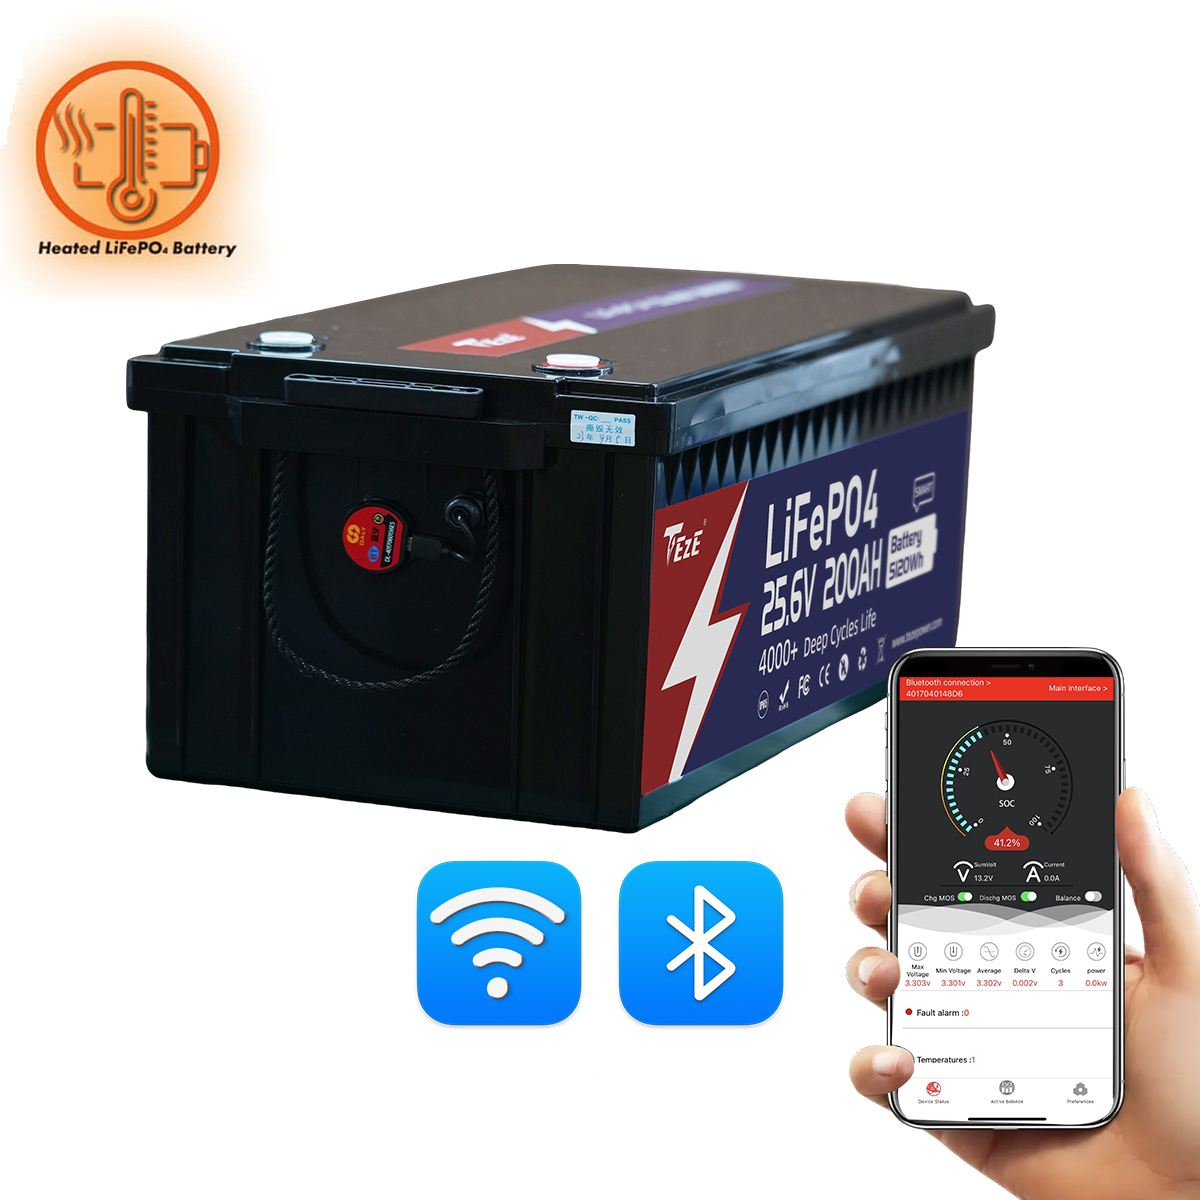 New Add WiFi-TezePower 24V 200Ah LiFePO4 Battery with WIFI and Bluetooth, Self-heating and Active Balancer, Built-in 200A Daly BMS(WIFI External Version)